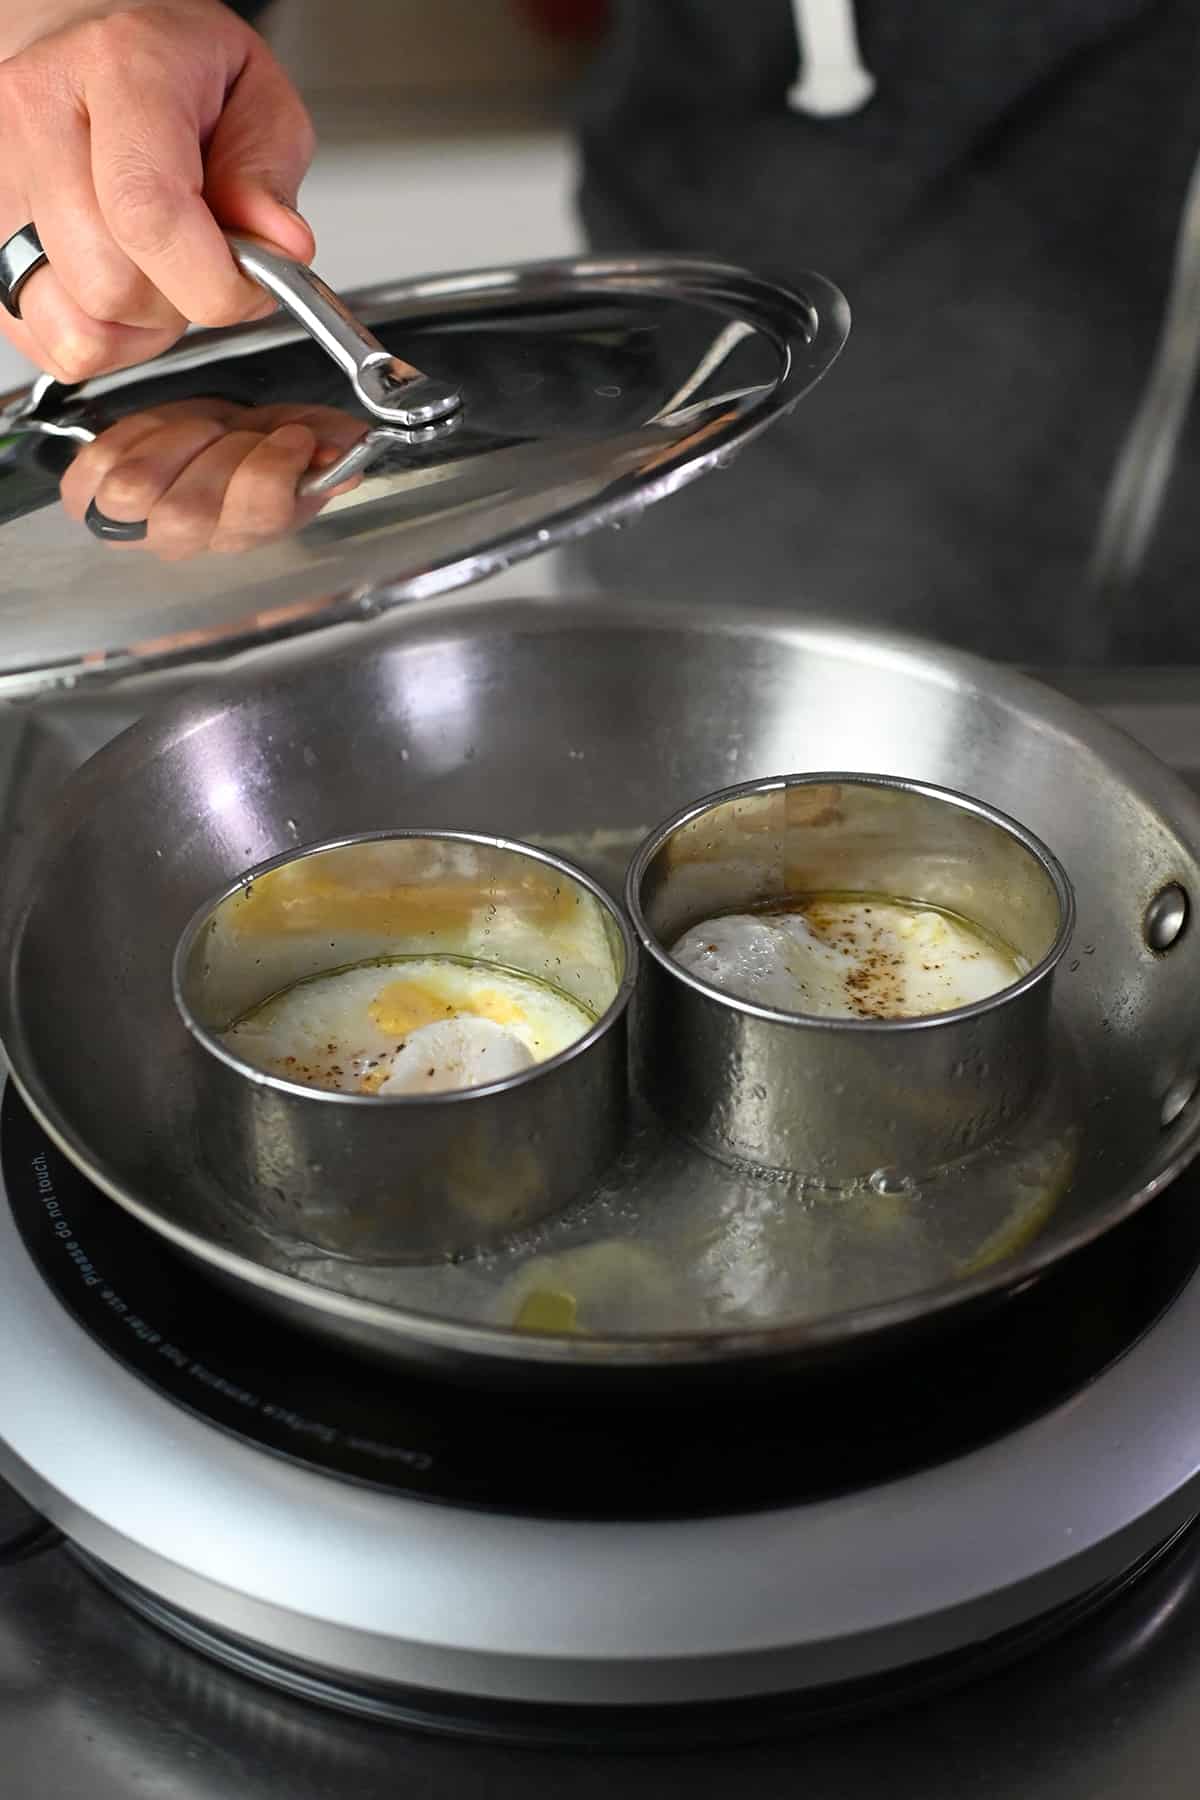 Removing the lid on a skillet filled with biscuit cutters and cooked eggs.